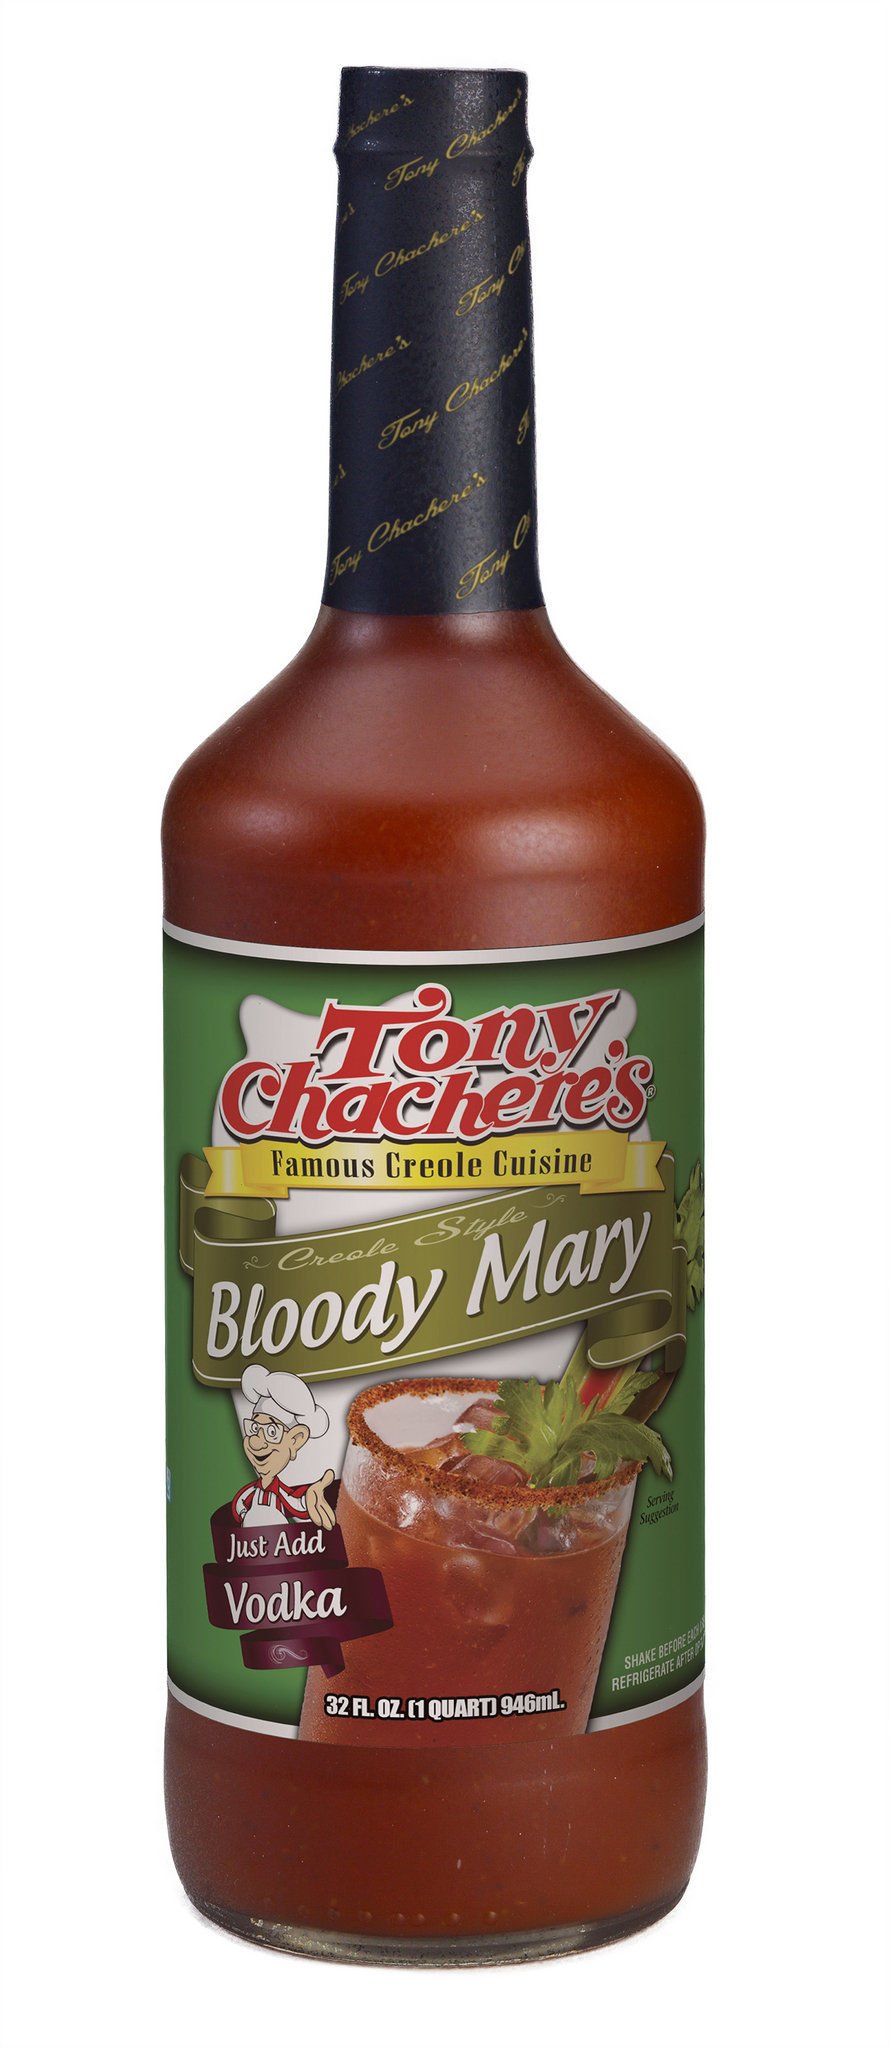 New Louisiana products include a Baton Rouge barbecue sauce and Tony's mixer